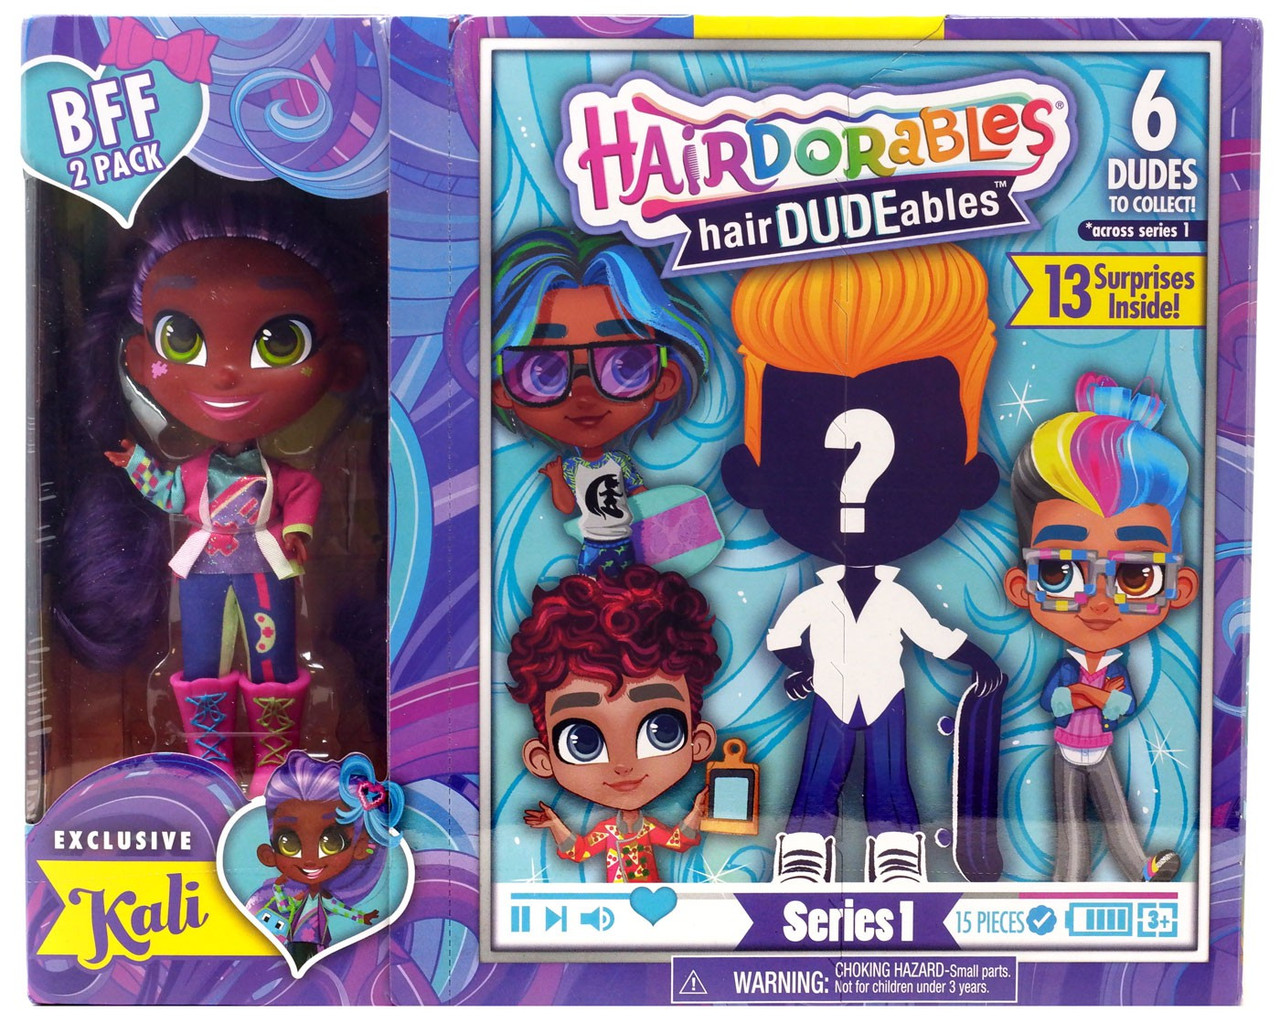 Hairdorables Hairdudeables Series 1 Kali Bff 2 Pack Just Play Toywiz